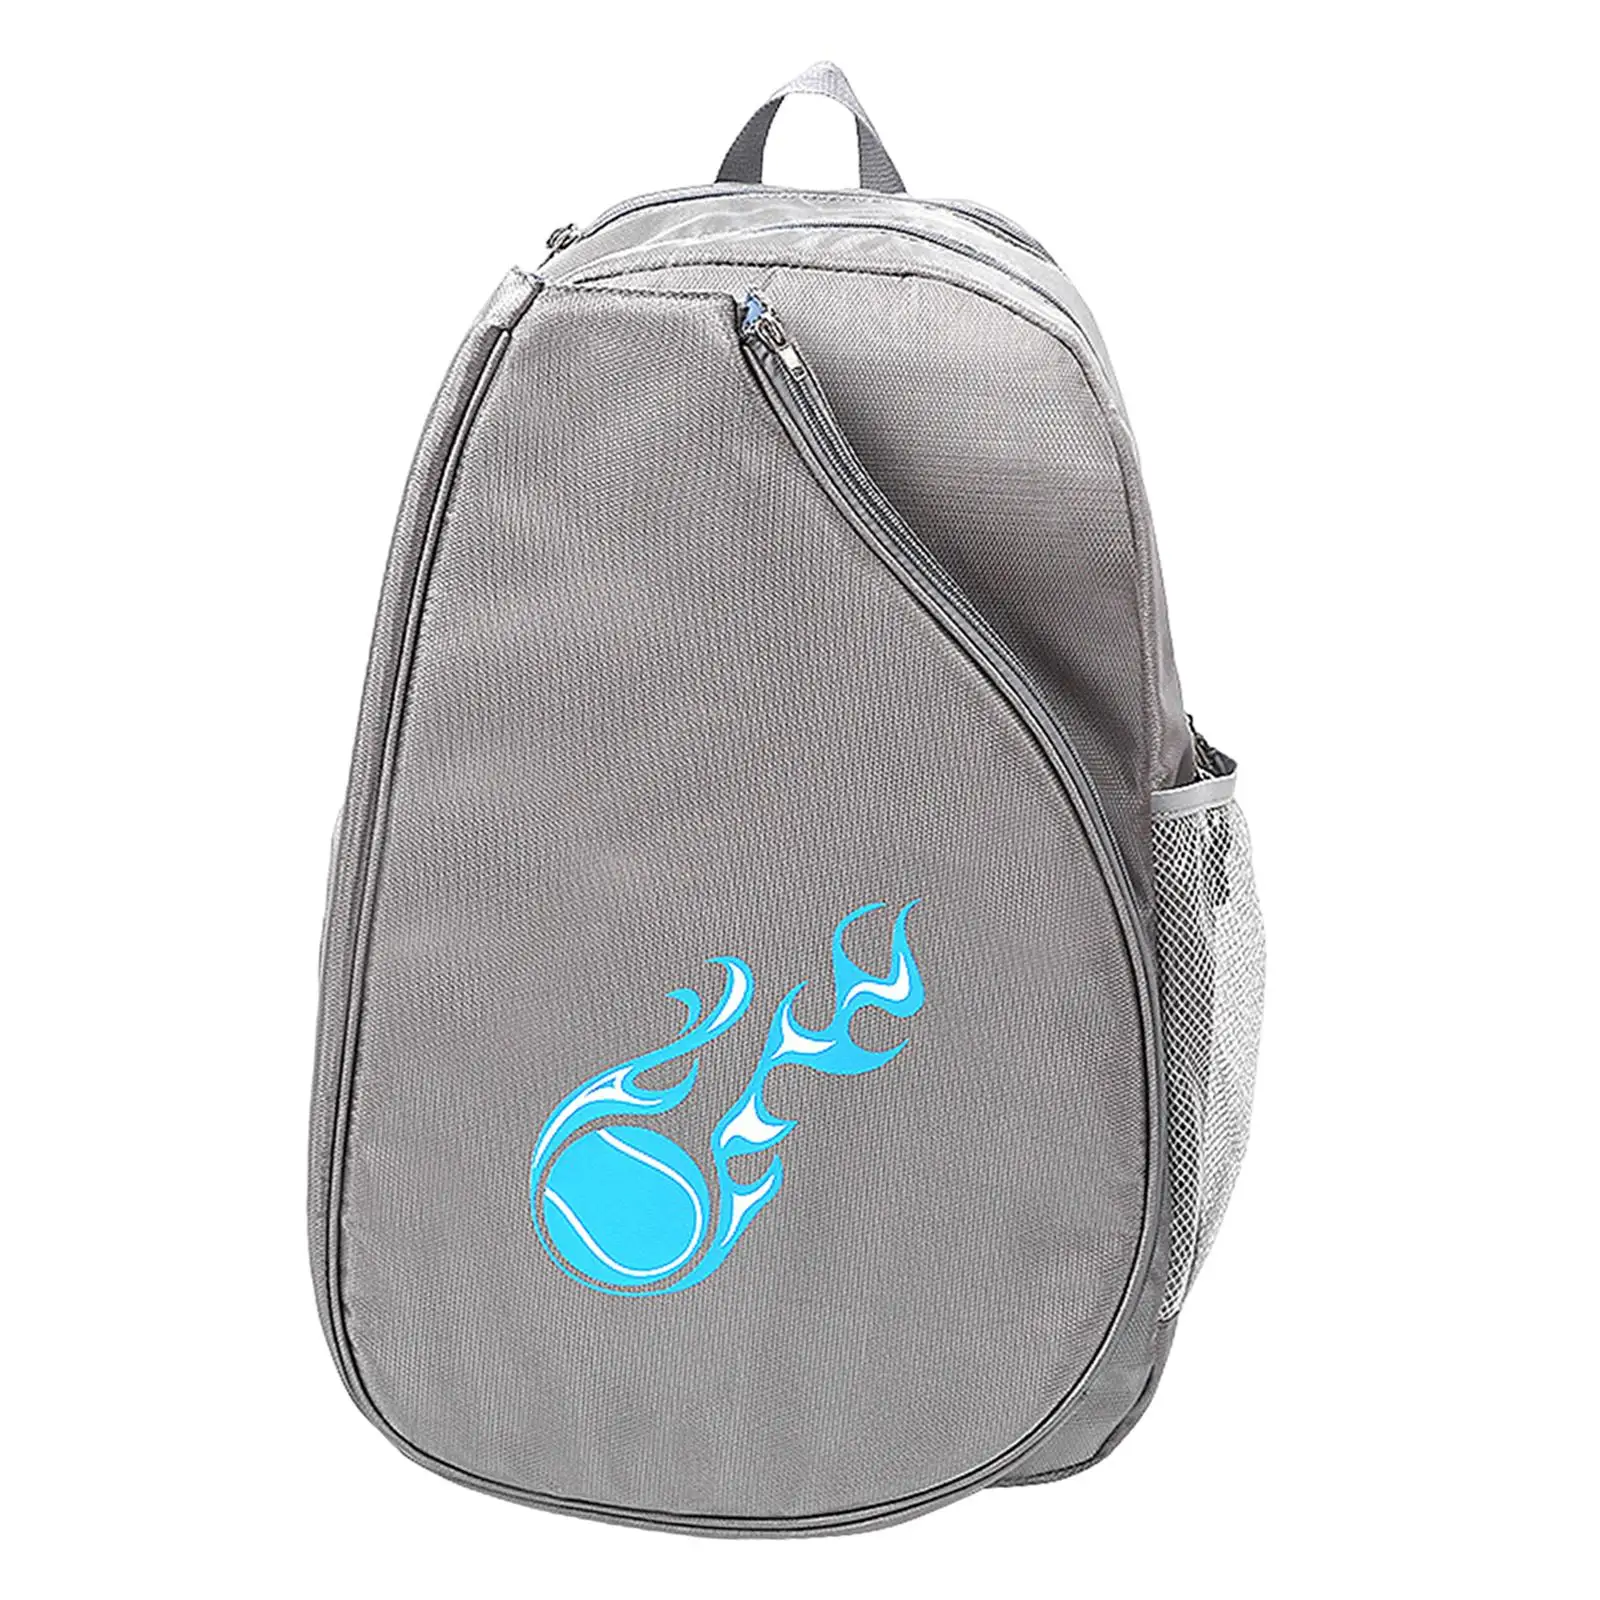 Pickleball Paddles Backpack Organizer Carry Case Water Resistant Tennis Racket Bag Carrying Tote for Water Bottle Tennis Racquet